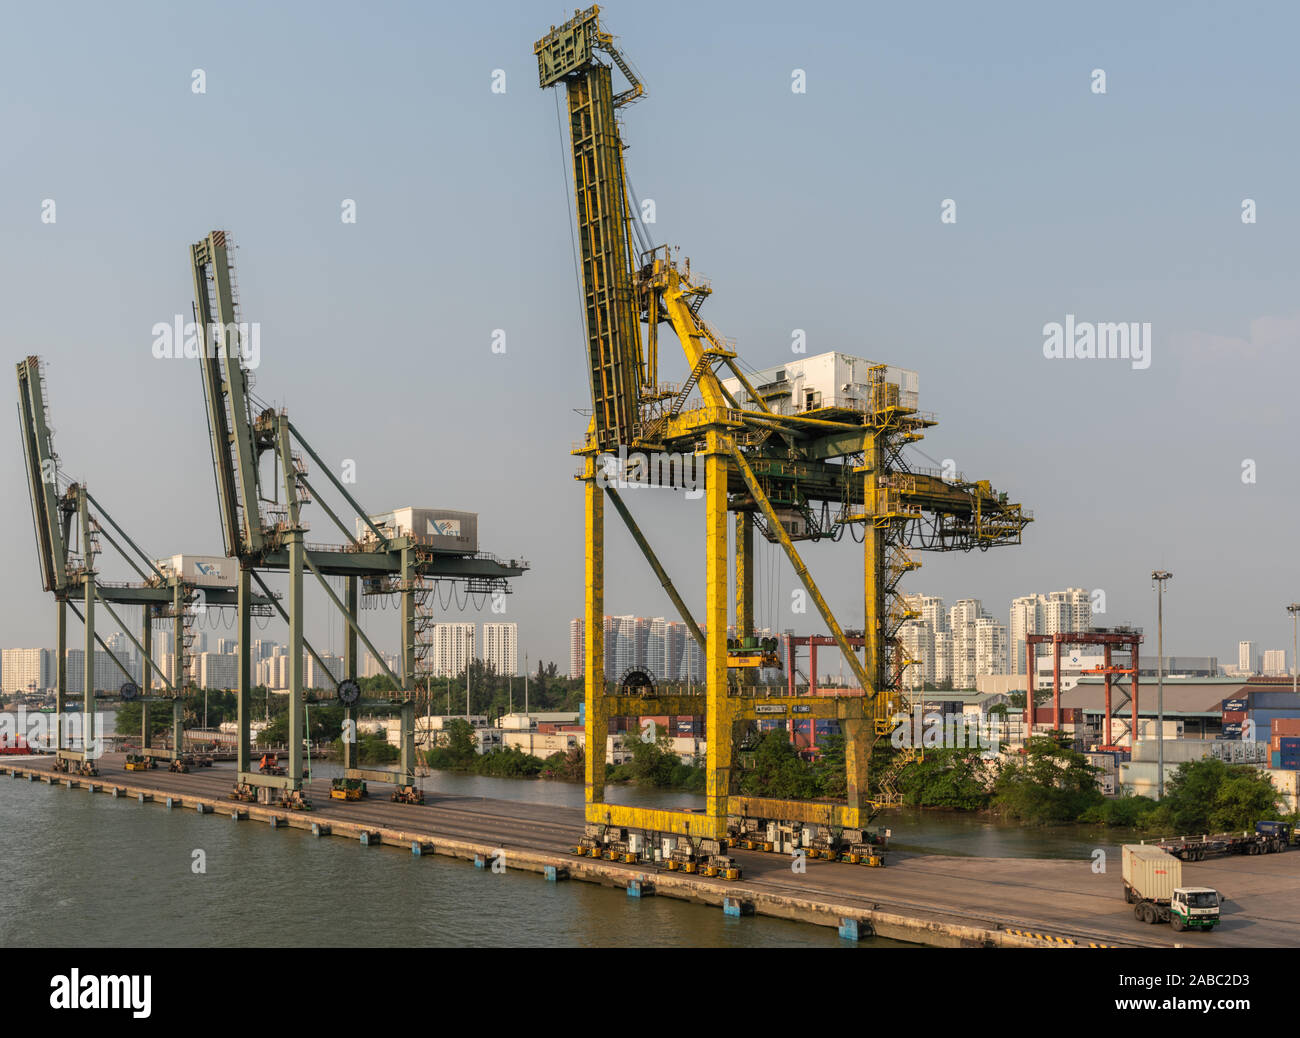 Ho Chi Minh City, Vietnam - March 13, 2019: Vict port on Song Sai Gon river at sunset. 3 idle cranes at quay, Residential high rise buildings in back. Stock Photo